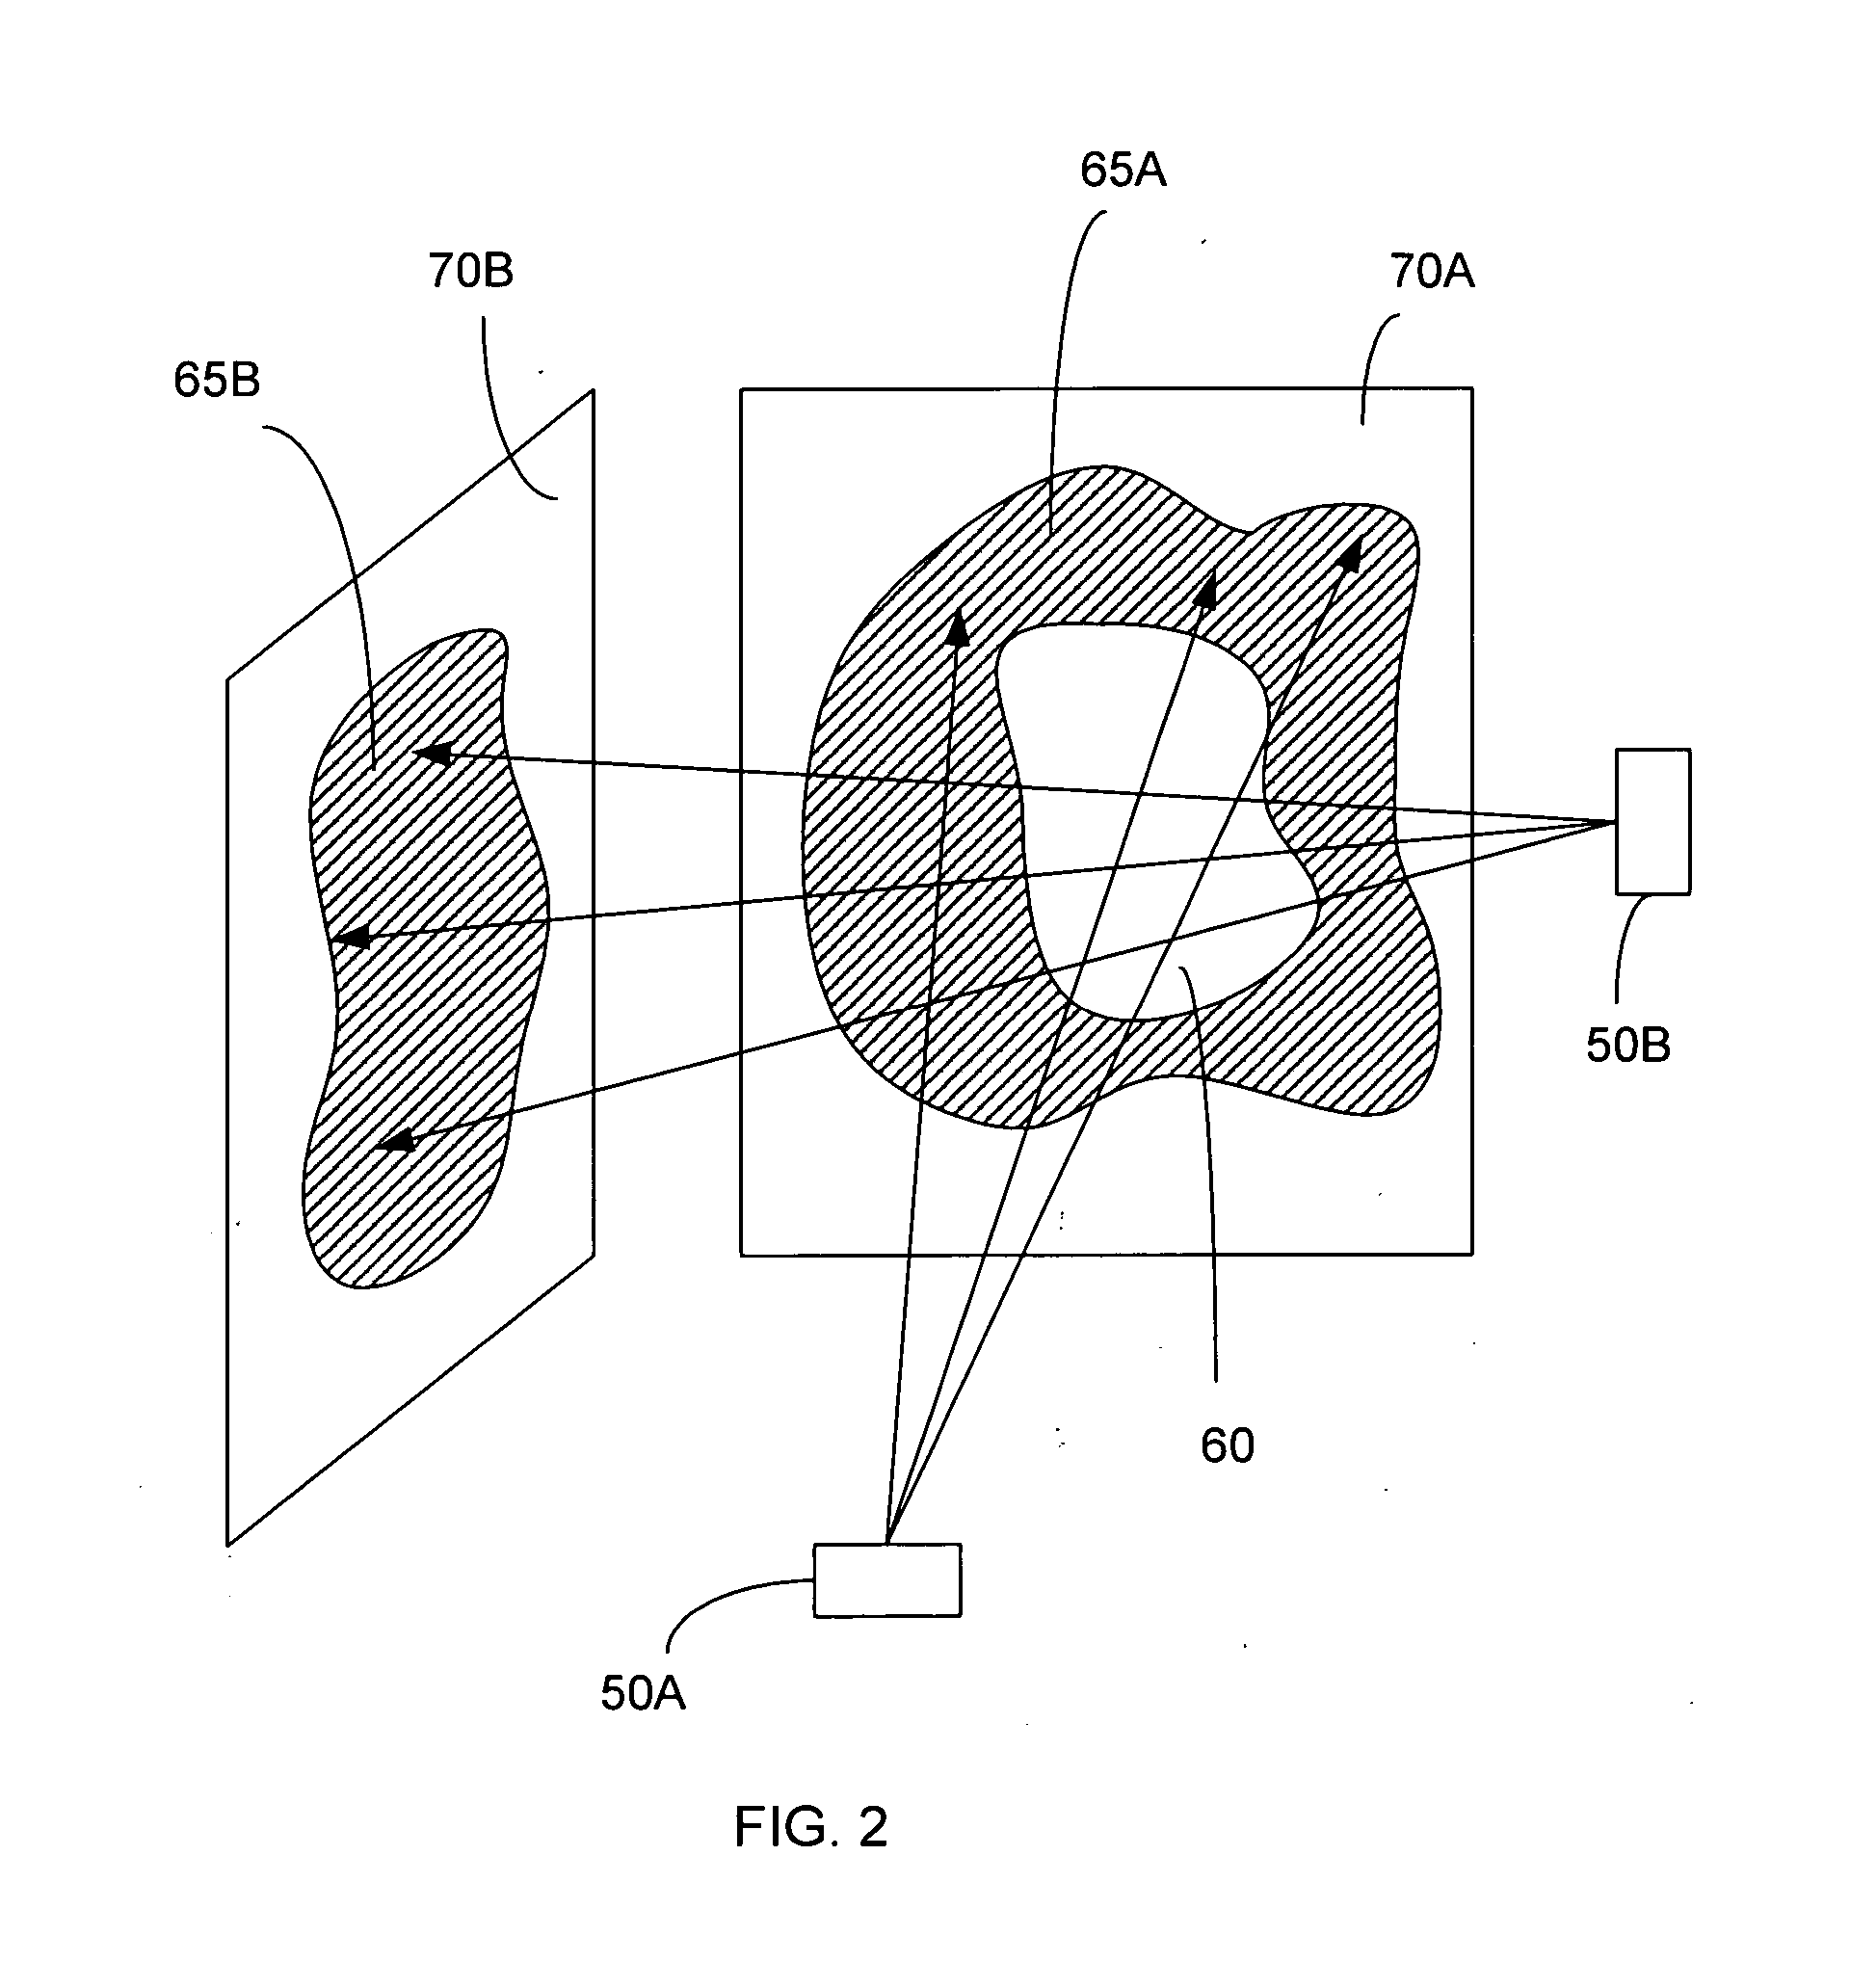 Apparatus and method for registering 2D radiographic images with images reconstructed from 3D scan data